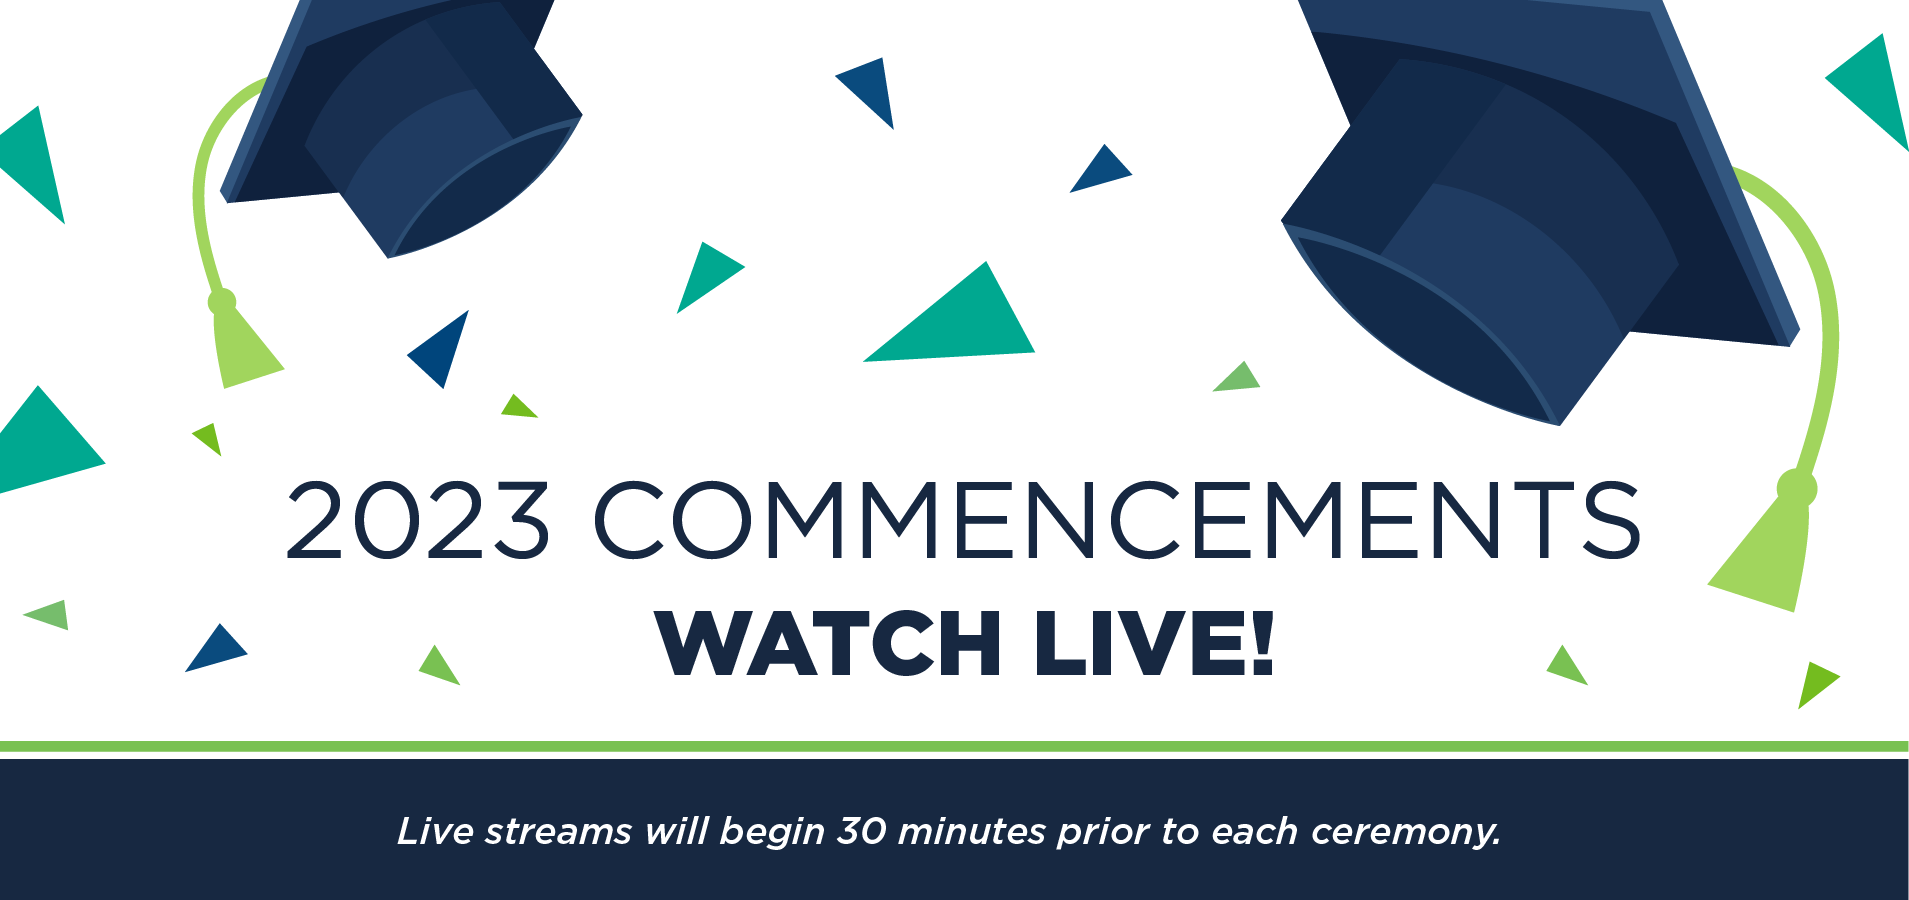 2023 Commencements. Watch Live!